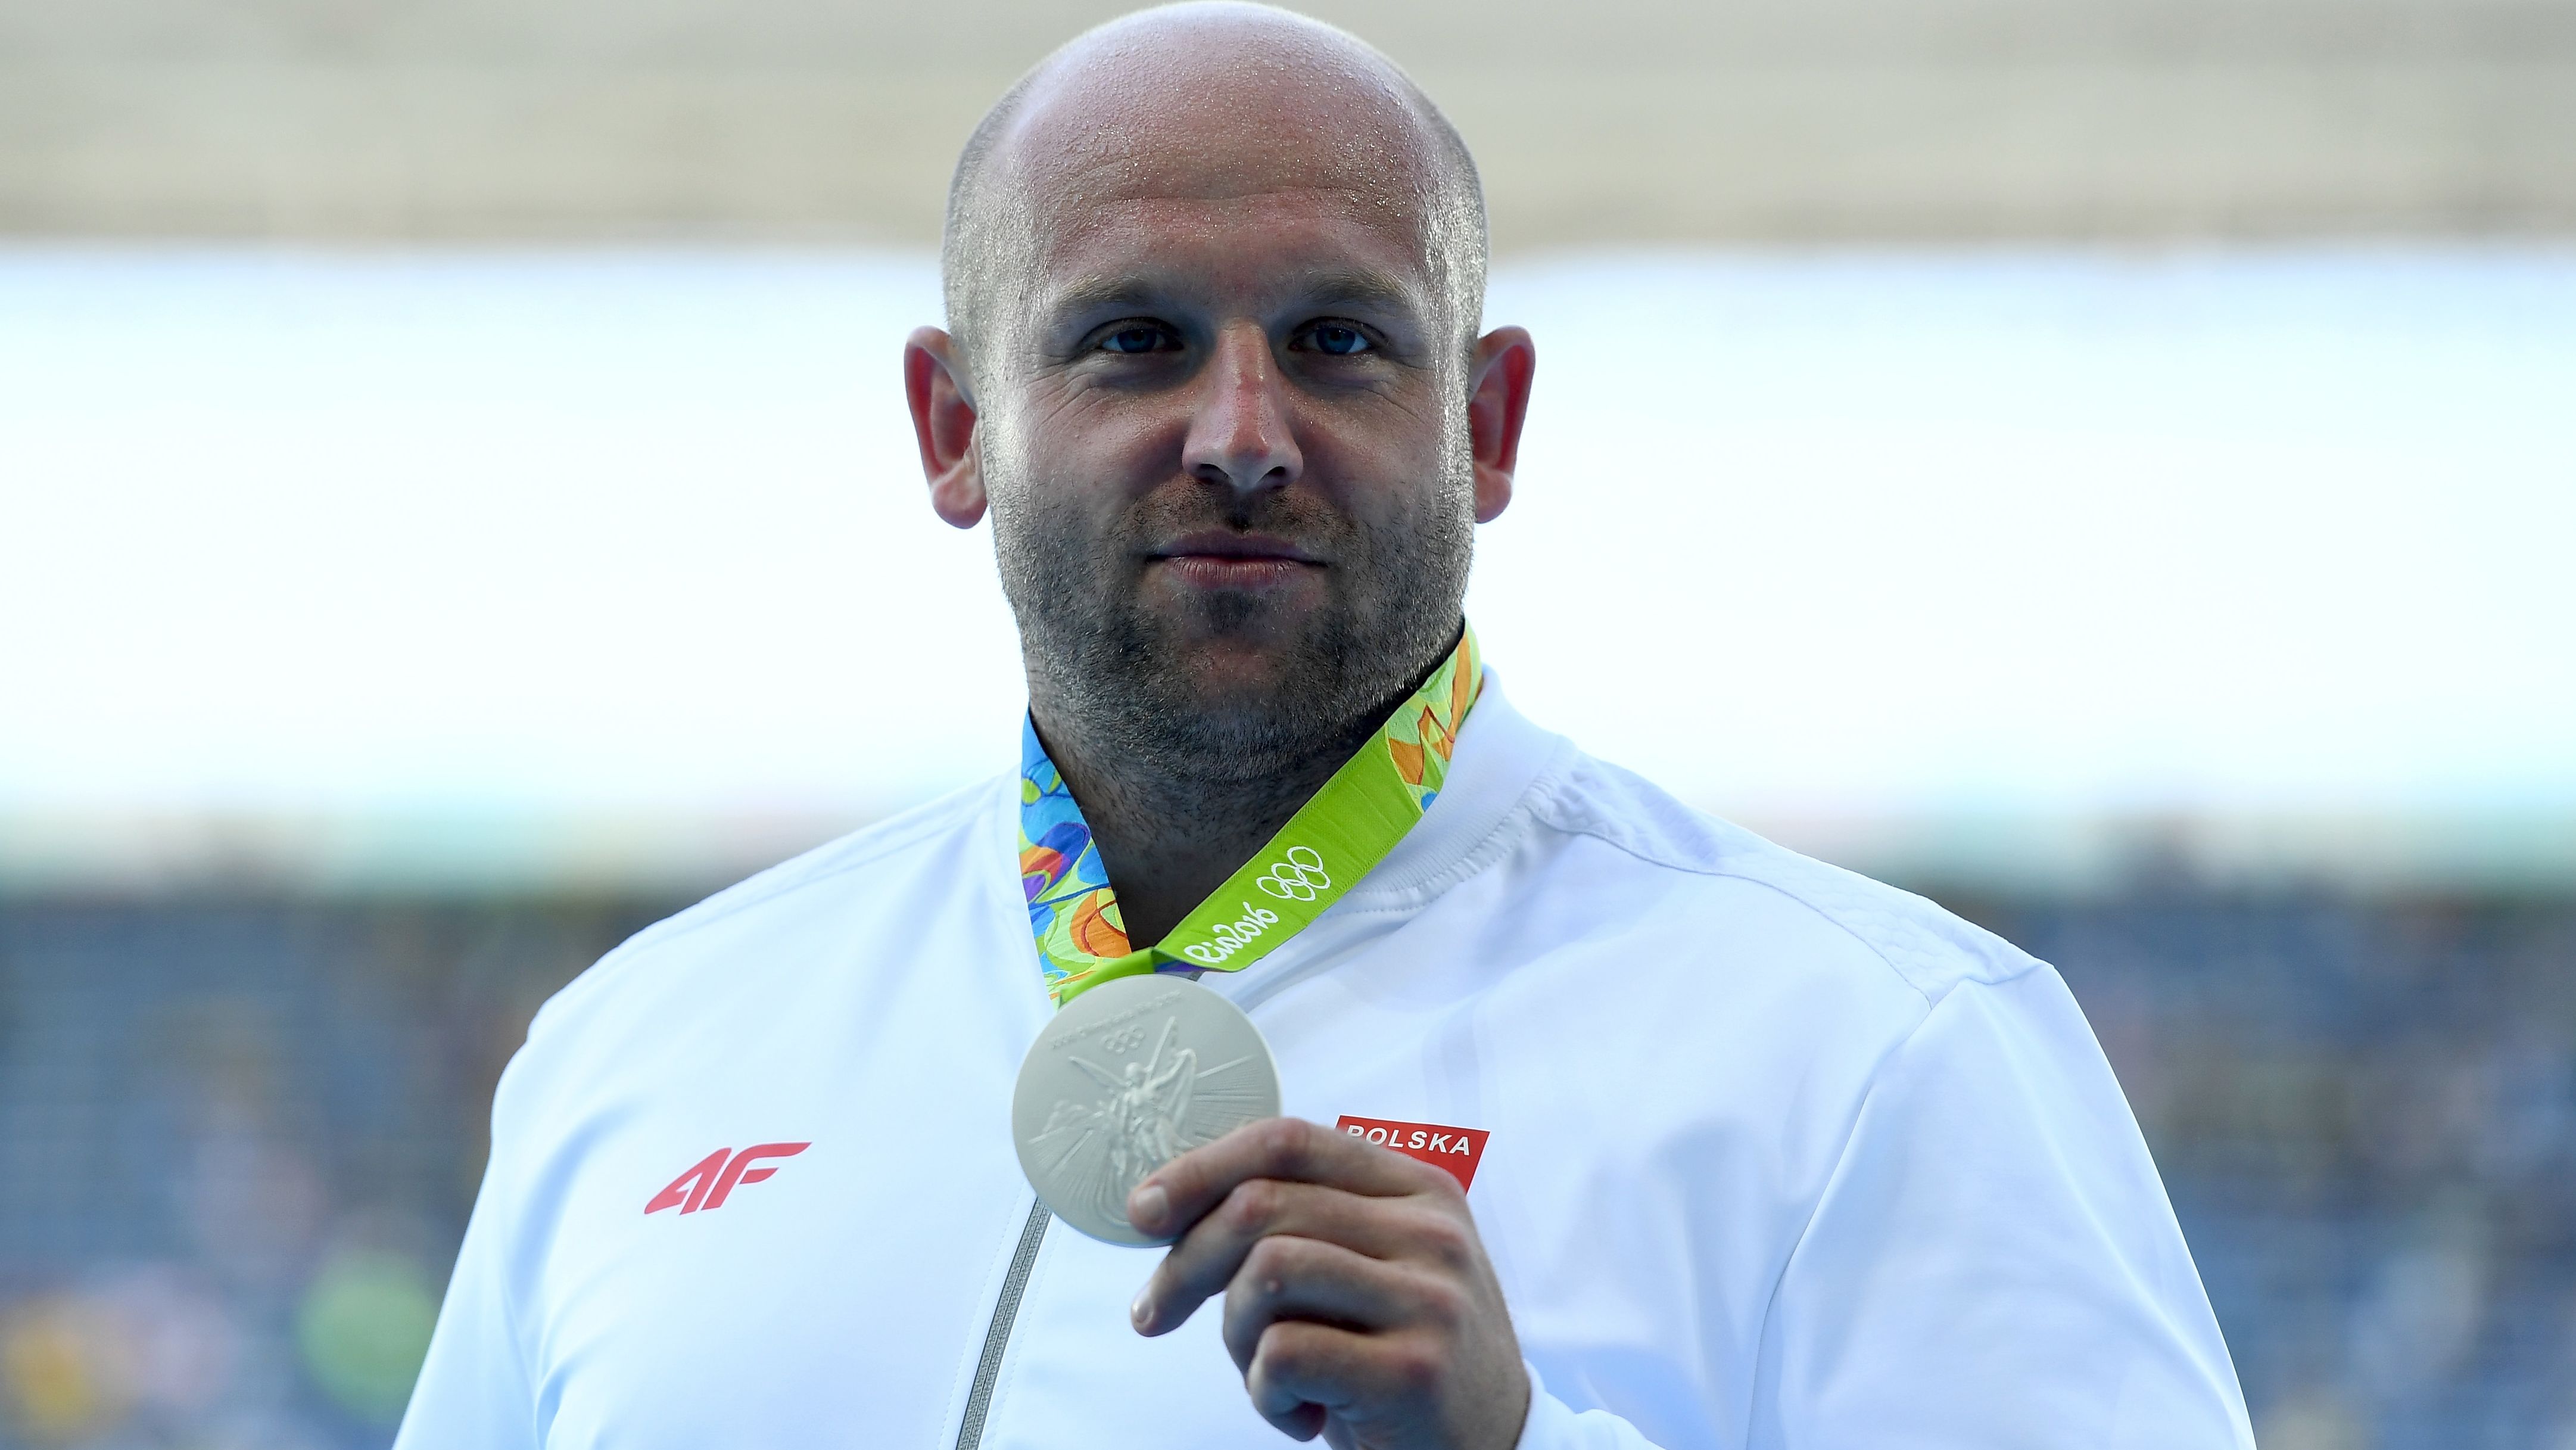 Silver medalist Piotr Malachowski decided to auction off his medal after learning about a little boy's battle with eye cancer. 